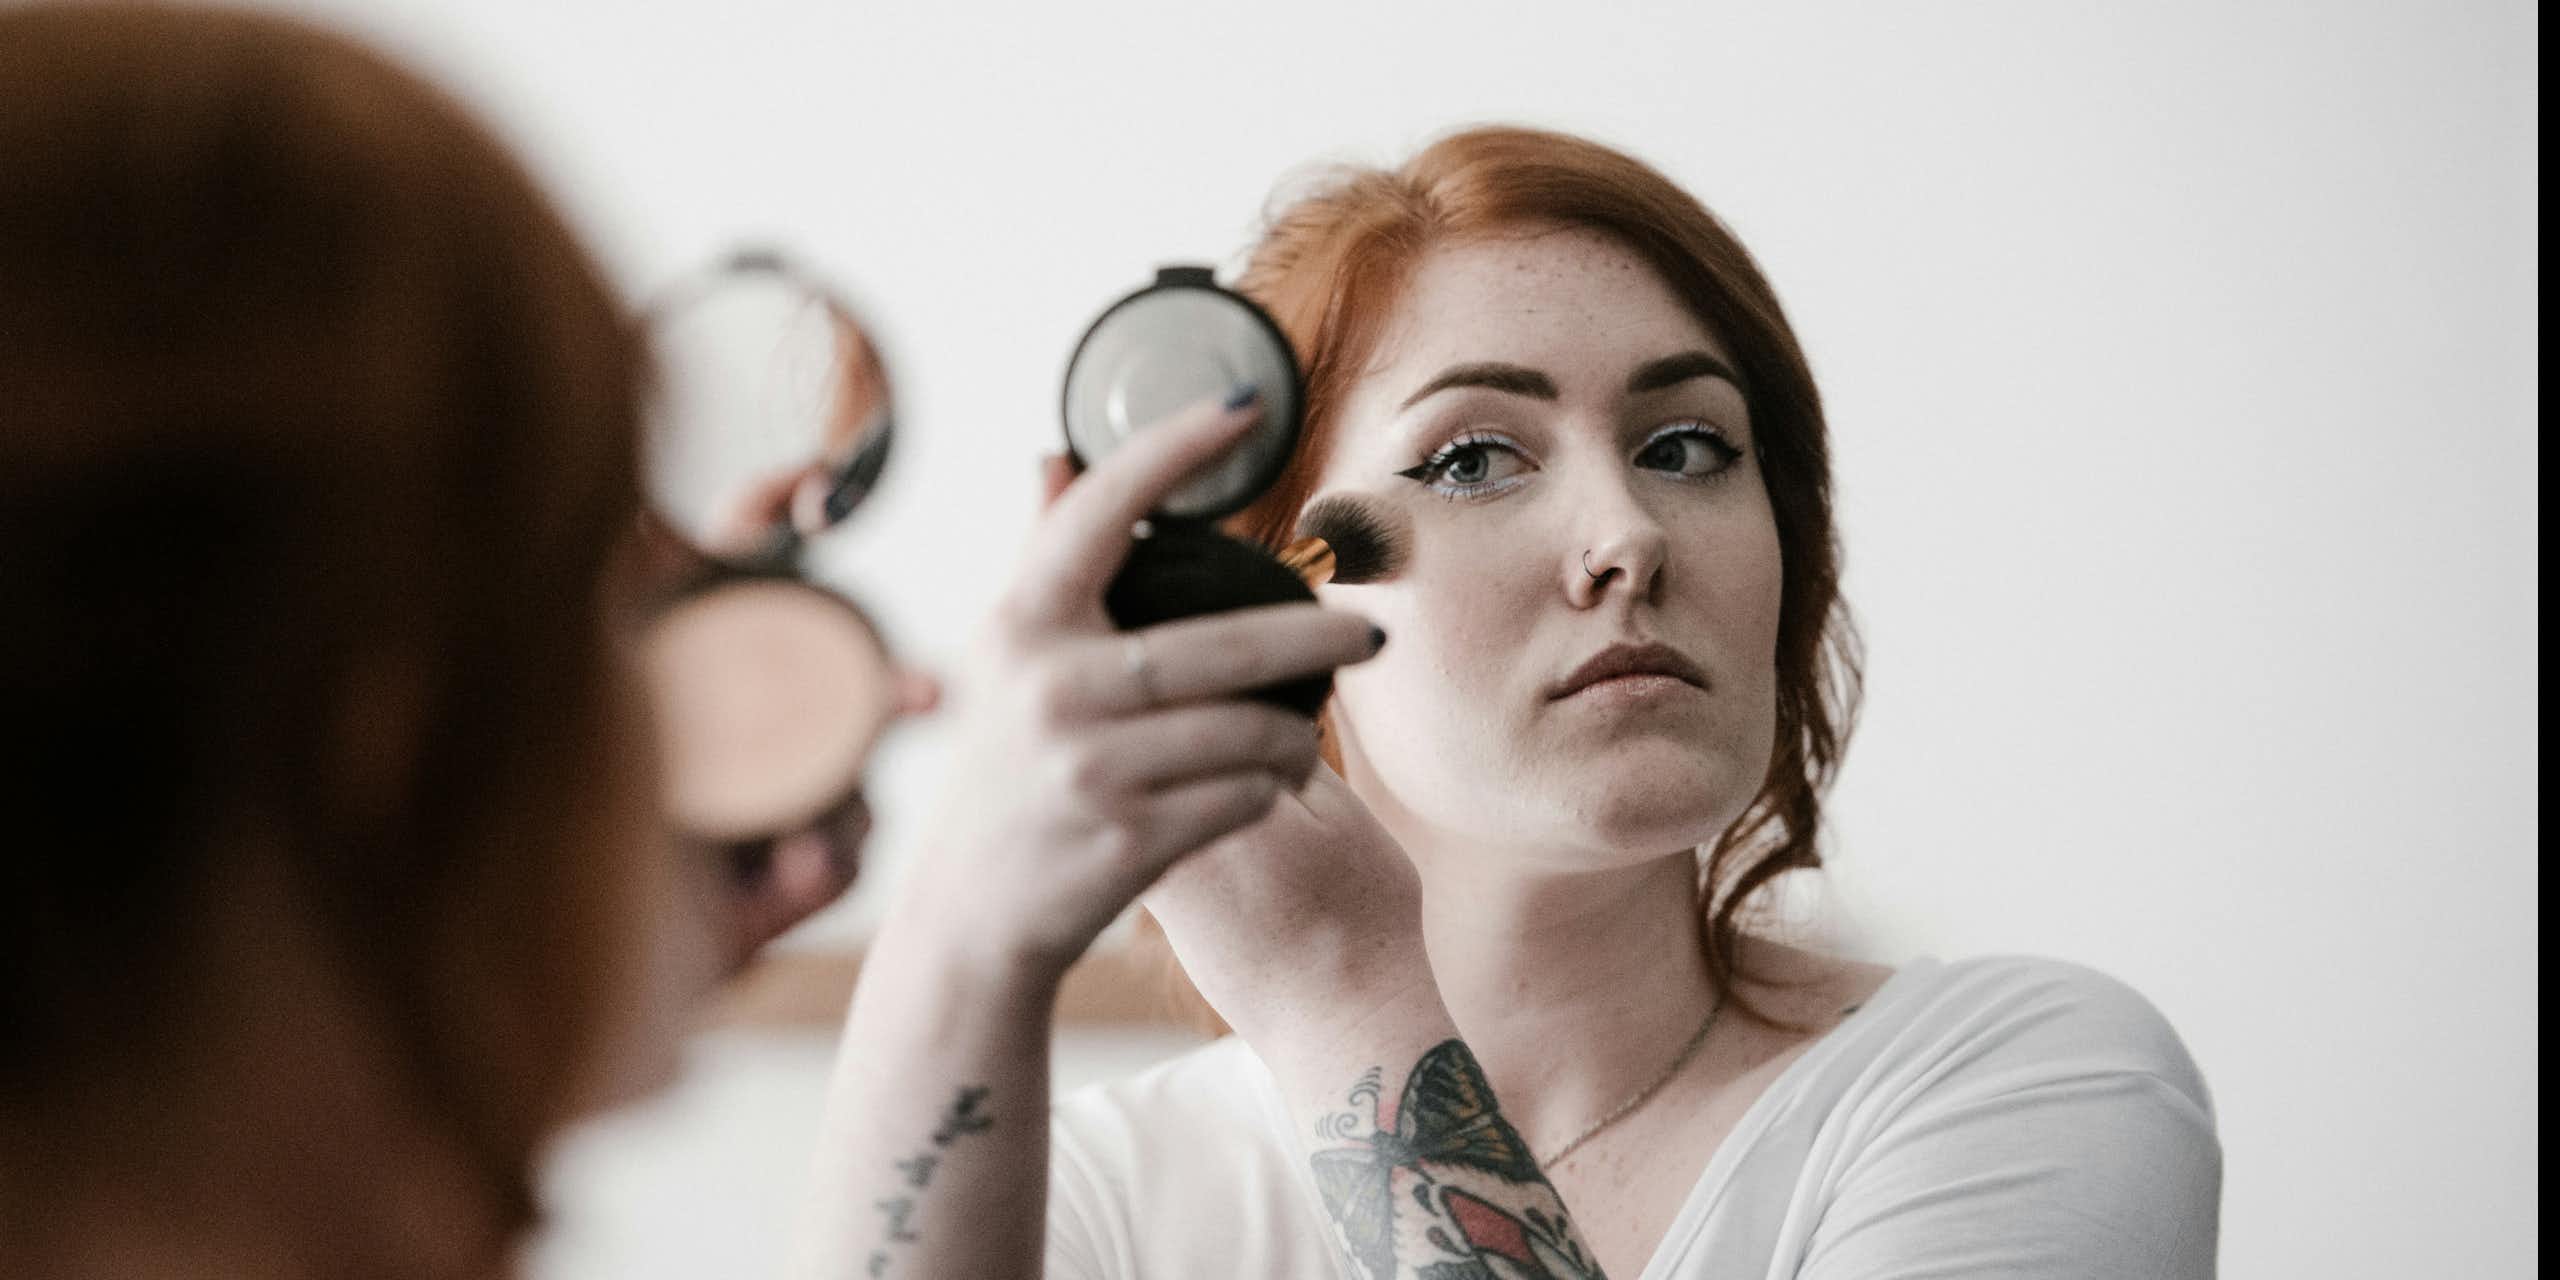 A redhaired woman applies makeup while looking in a compact mirror.